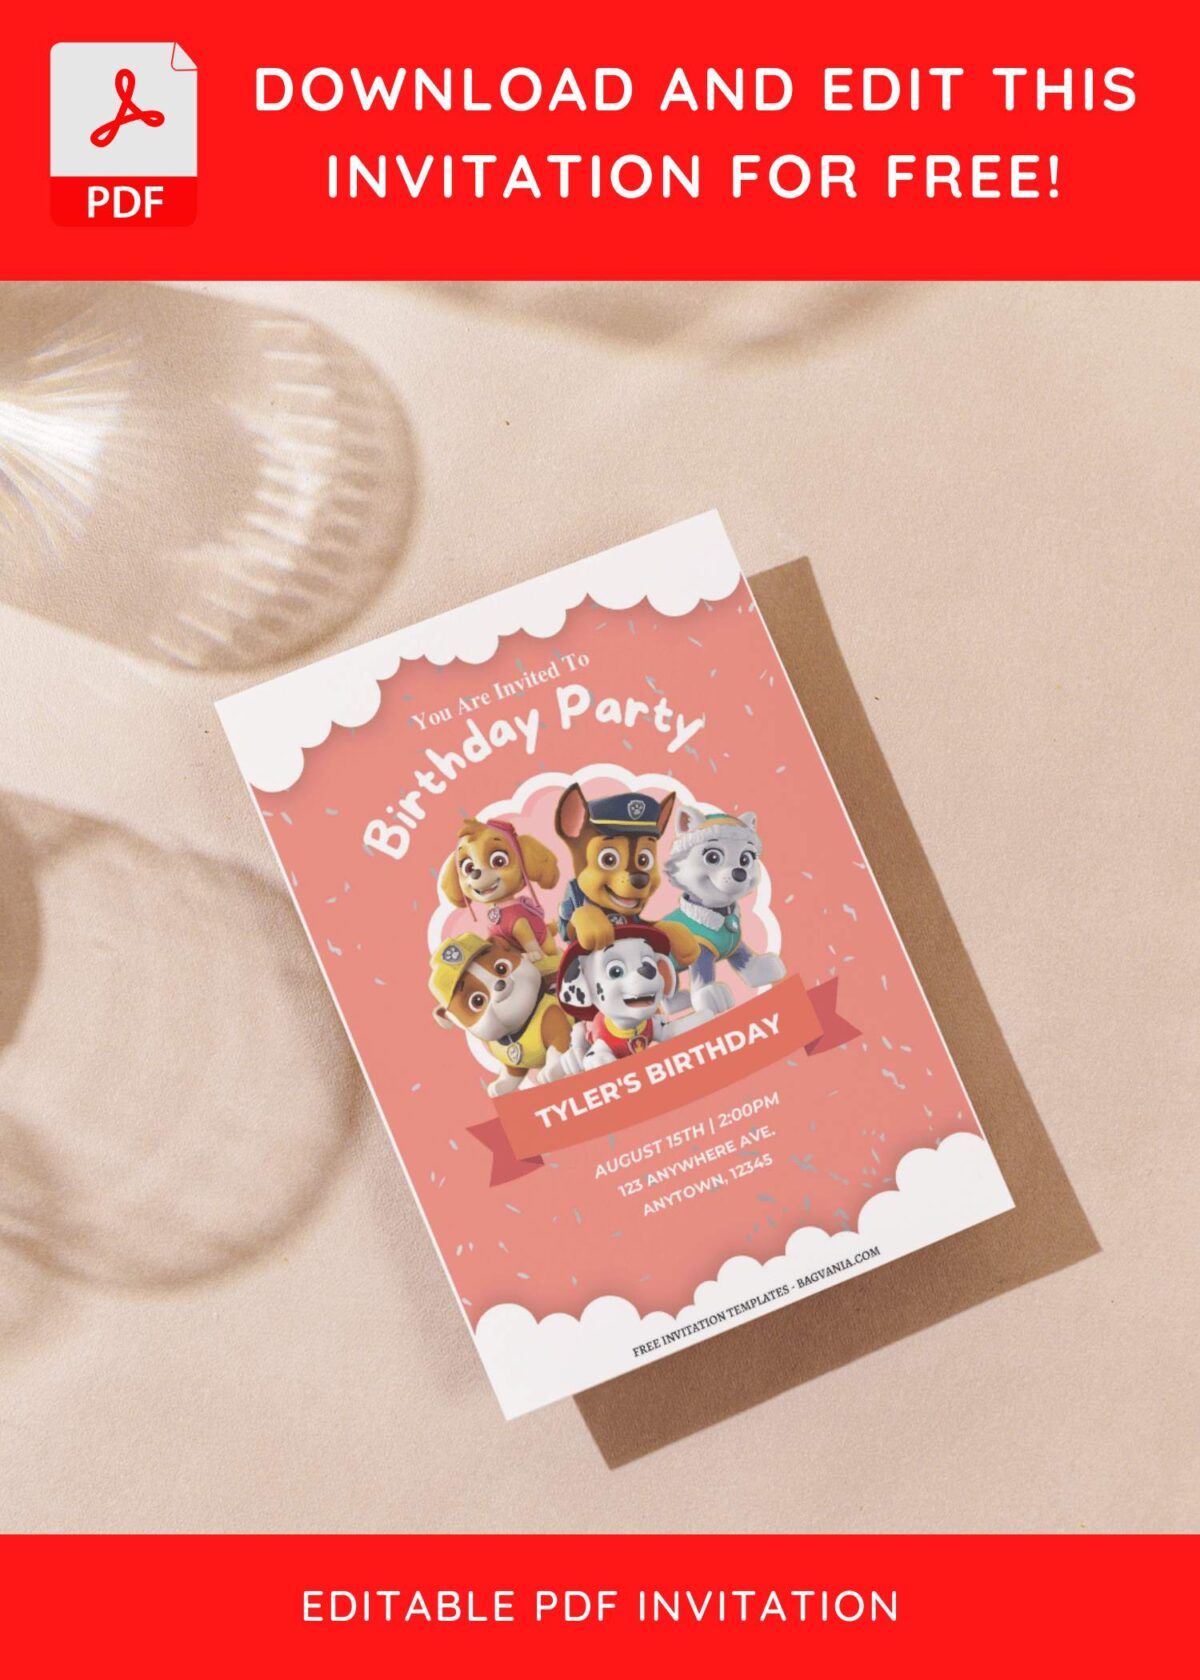 (Free Editable PDF) PAW-SOME PAW Patrol Birthday Invitation Templates with Rubble And Marshall